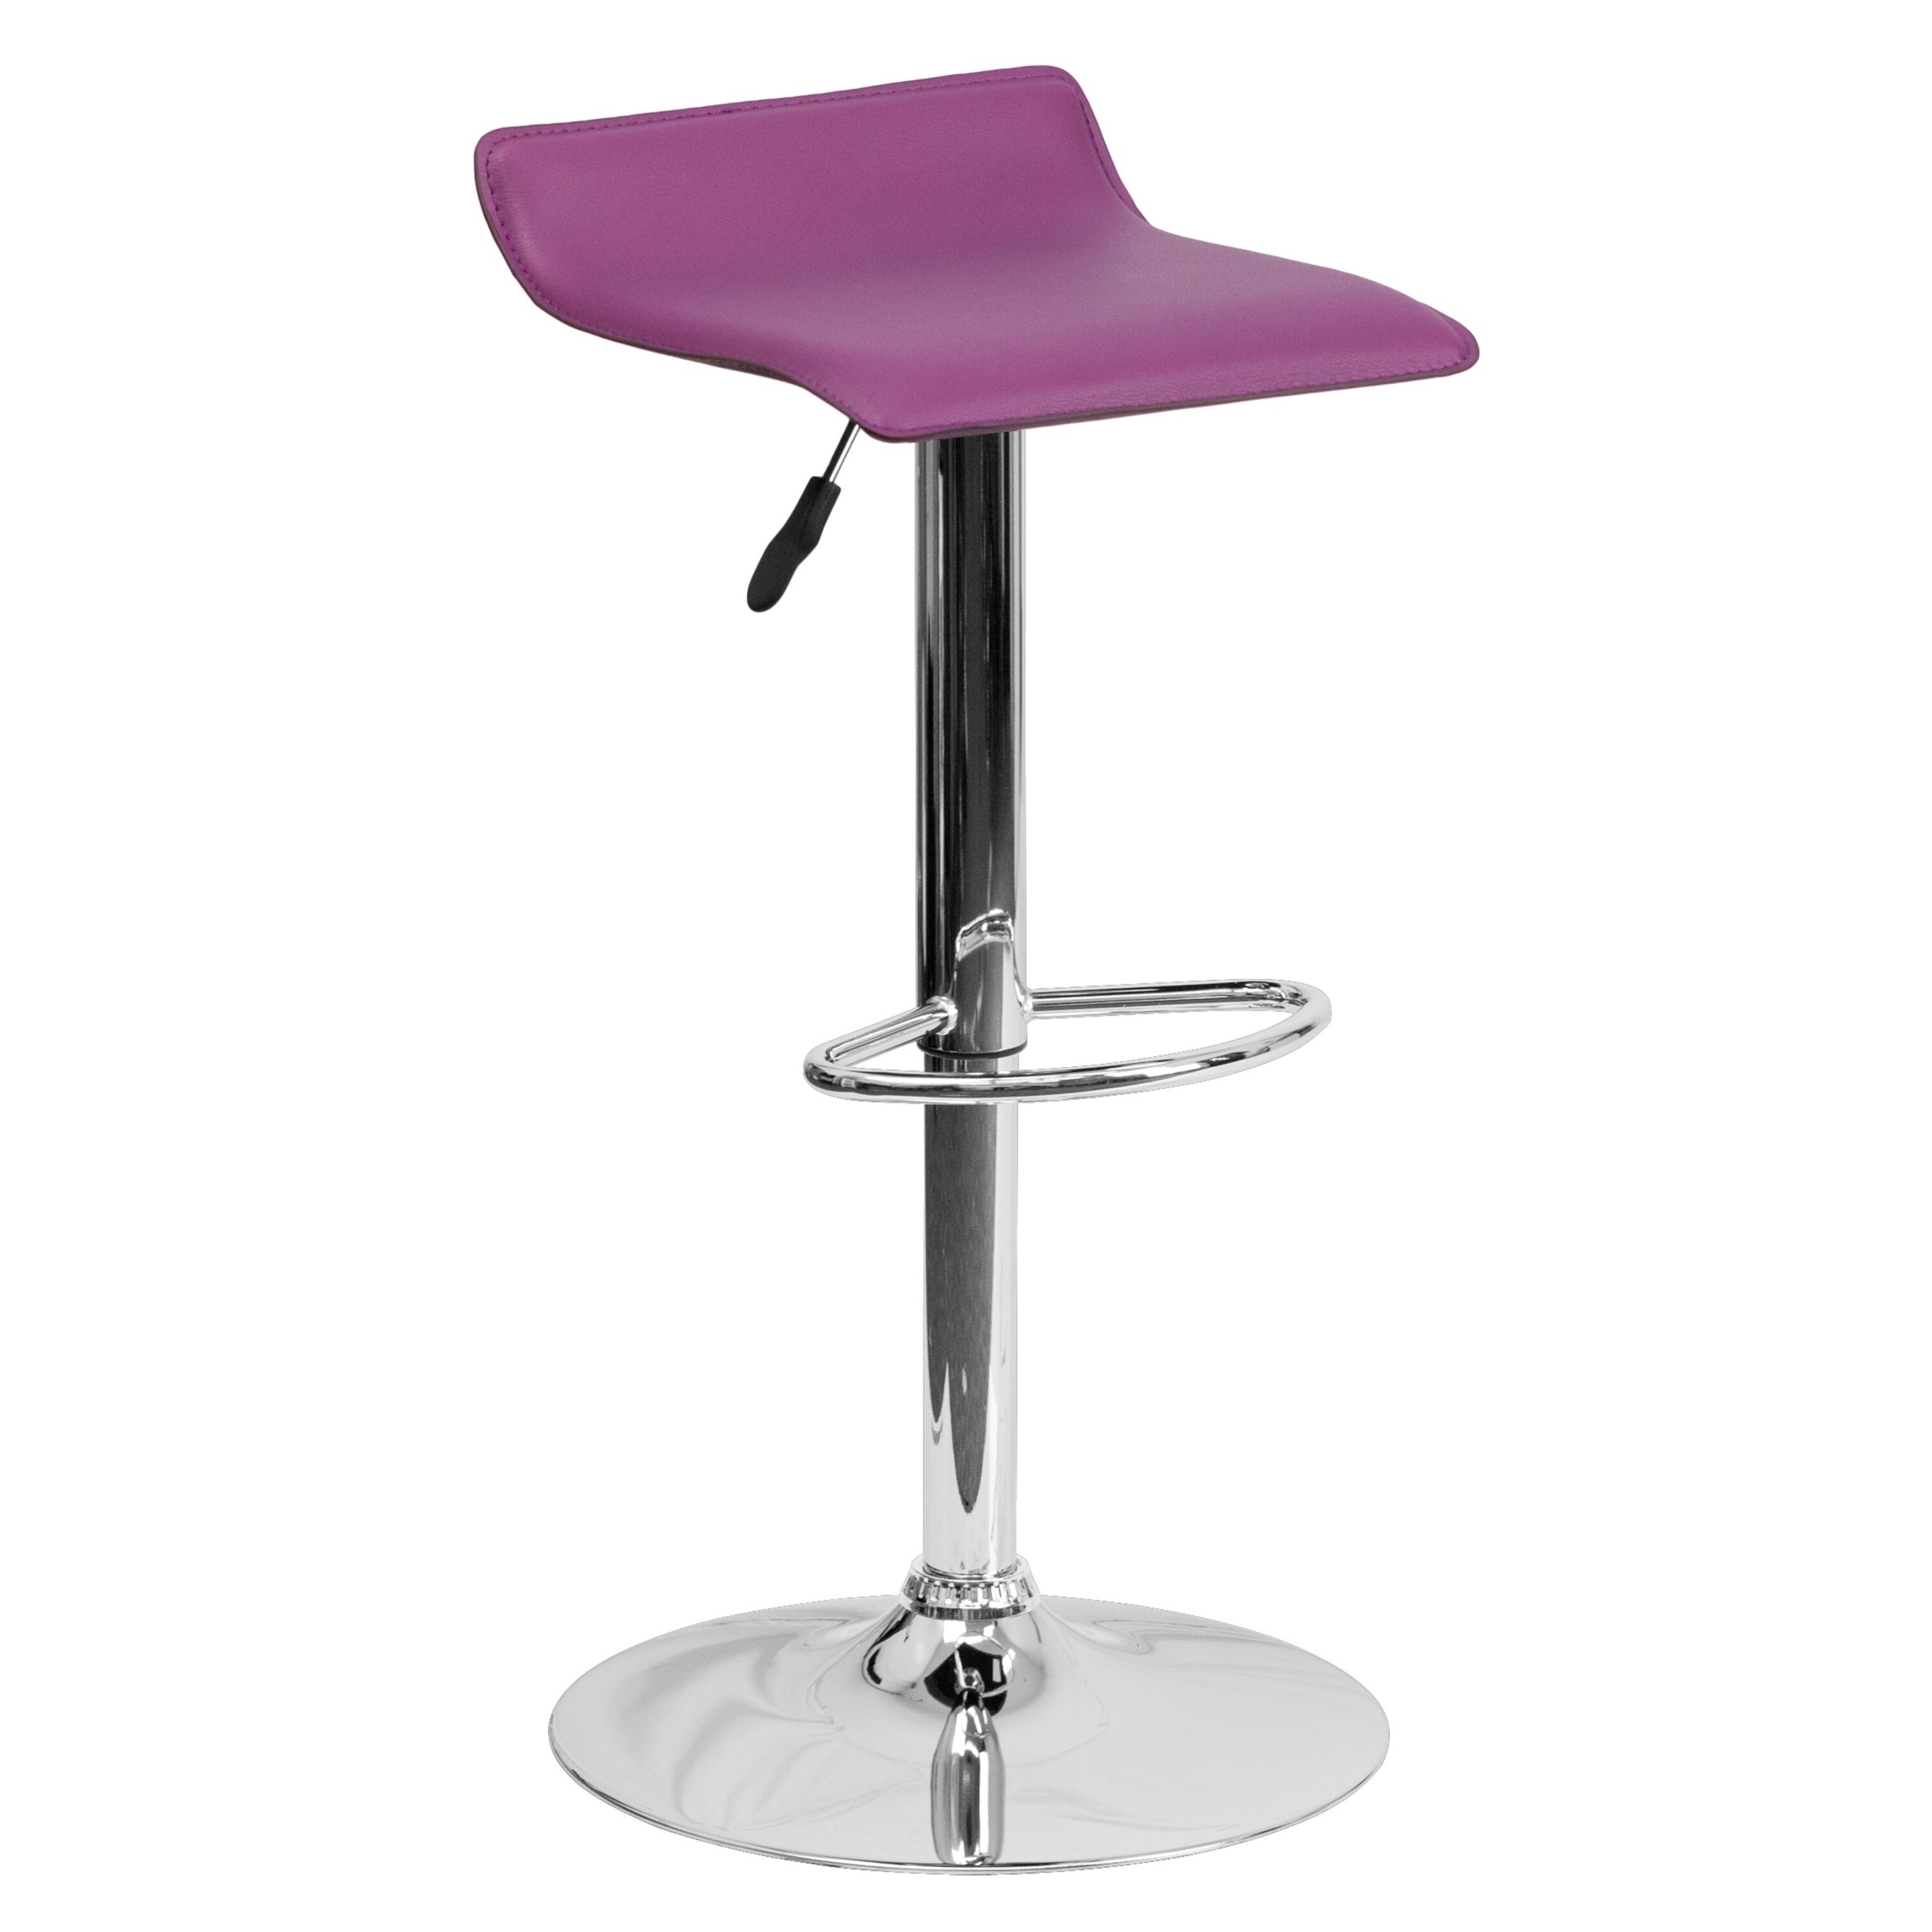 Contemporary Adjustable Height Swivel Bar Stool with Cushion